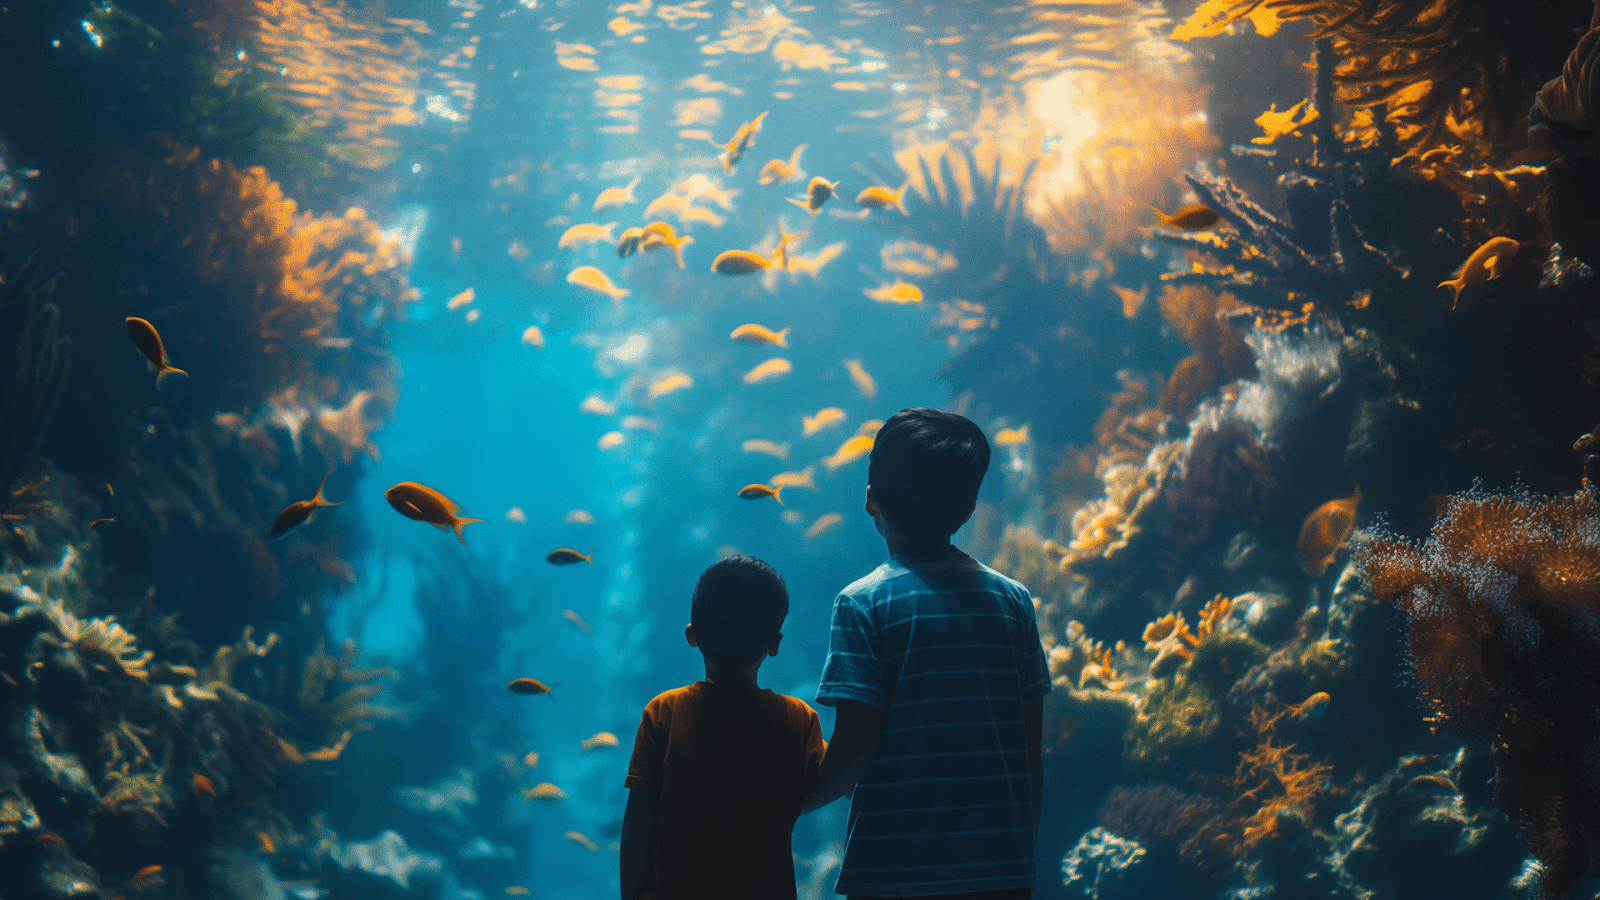 Two children viewing an aquarium—a truly magical experience to consider when planning a trip to South Korea.